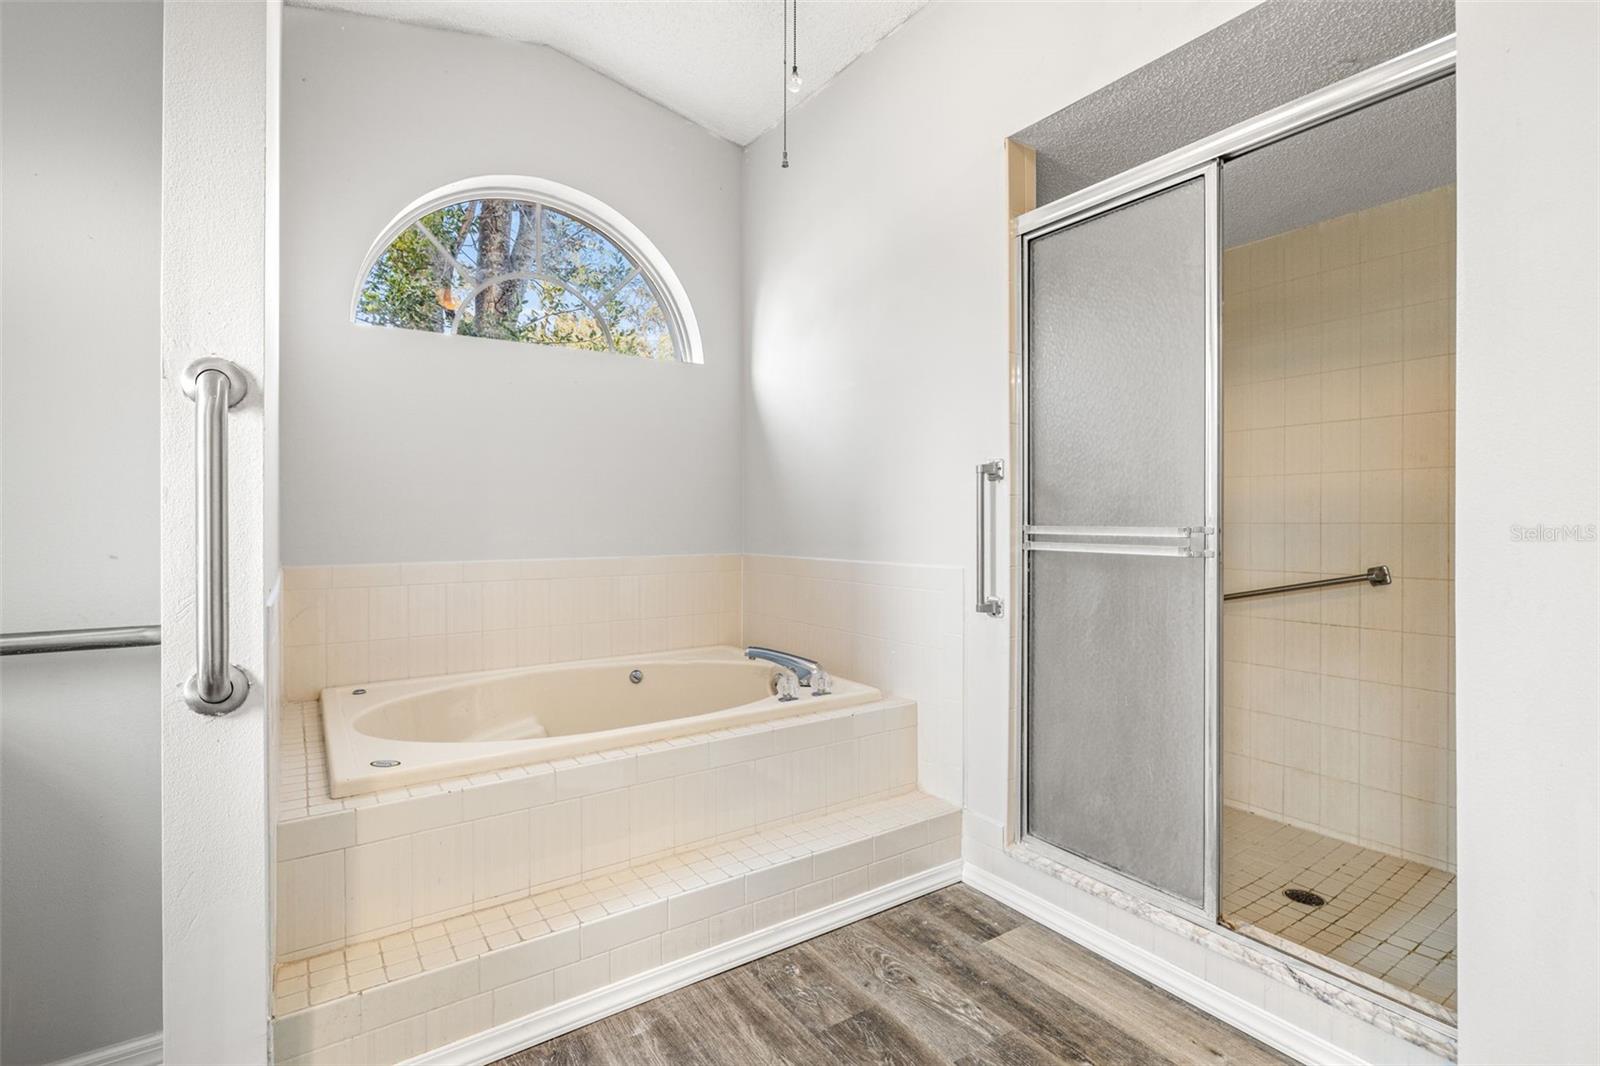 Jetted Tub, Separate Shower